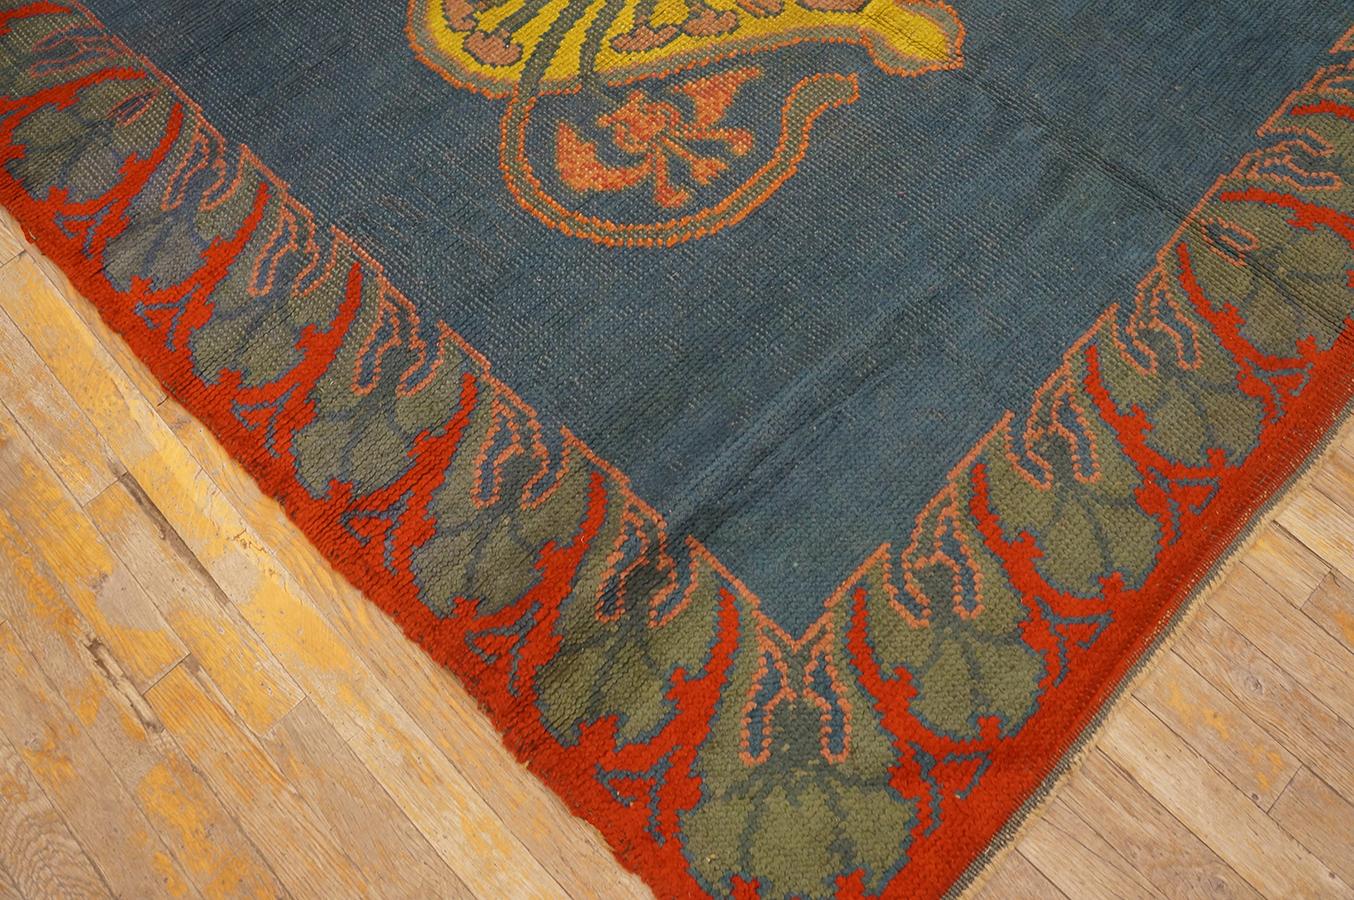 Hand-Knotted Early 20th Century Irish Donegal Arts & Crafts Carpet ( 5'7